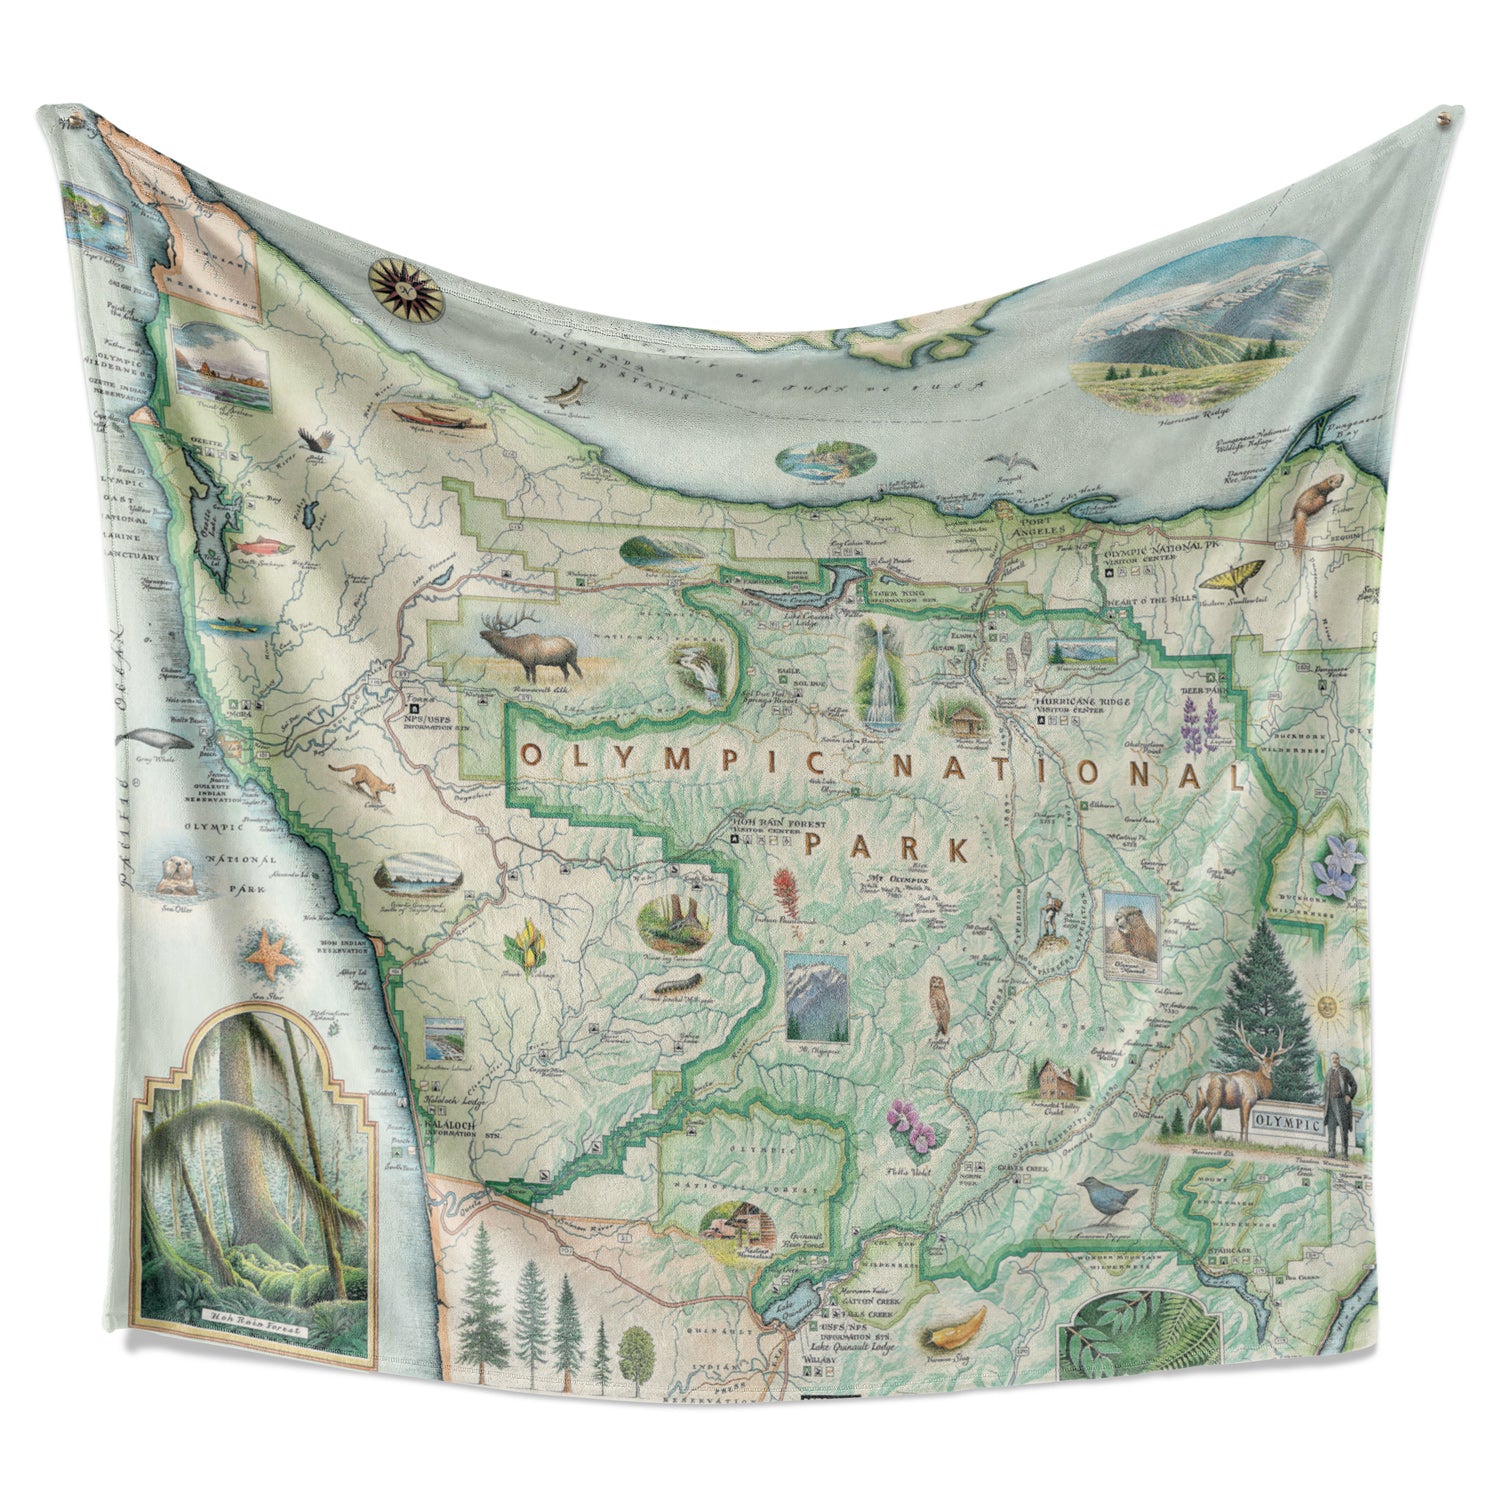 Hanging Olympic National Park fleece blanket. Real art map of Olympic on blanket.